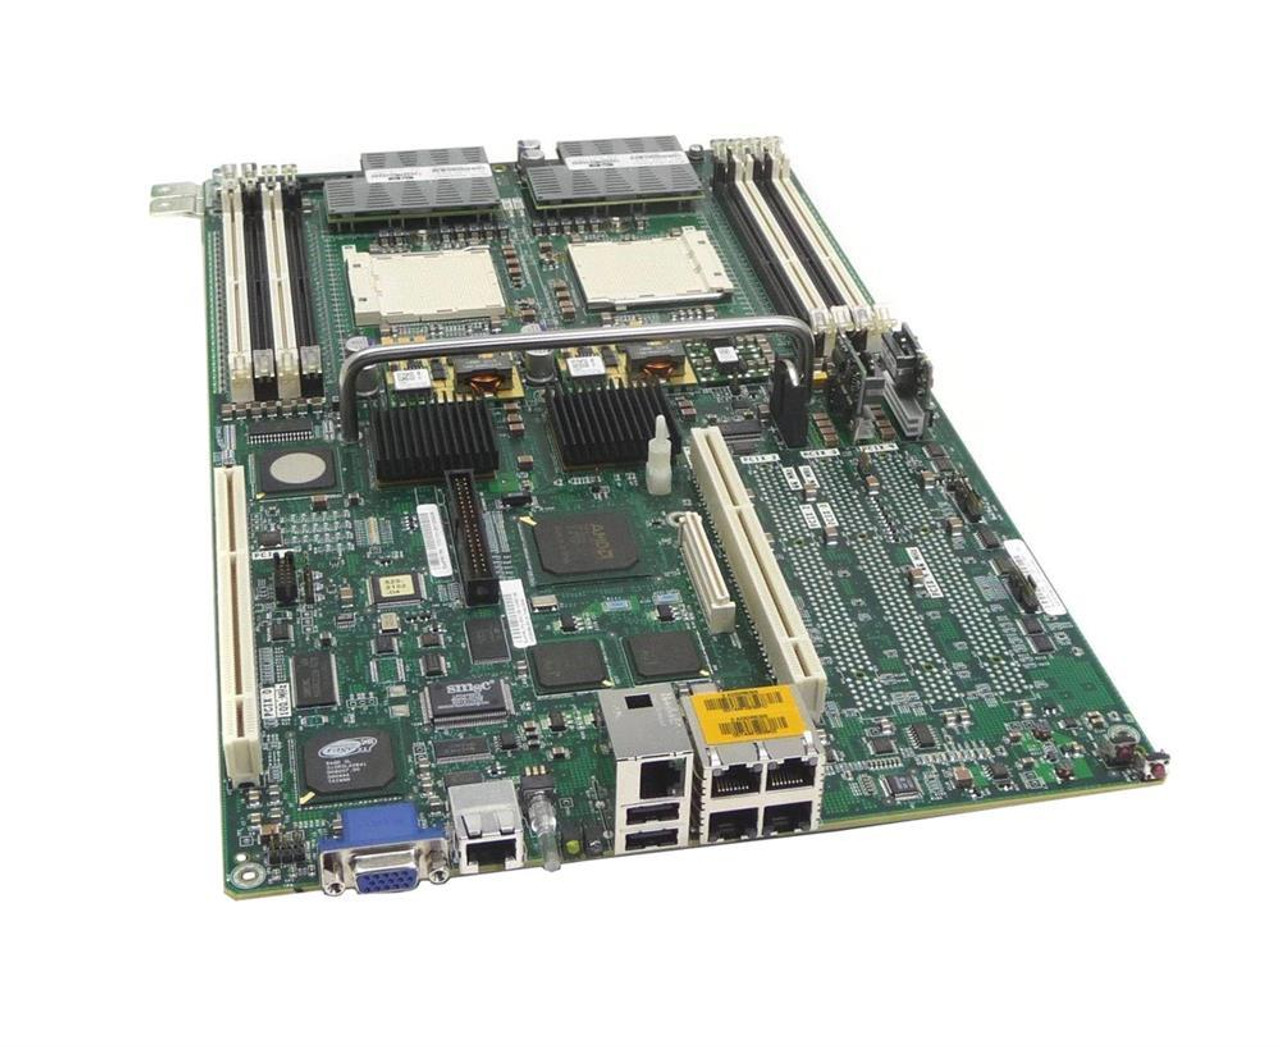 500726102 Sun System Board (Motherboard) Microsystems Main for X4100 Server (Refurbished)